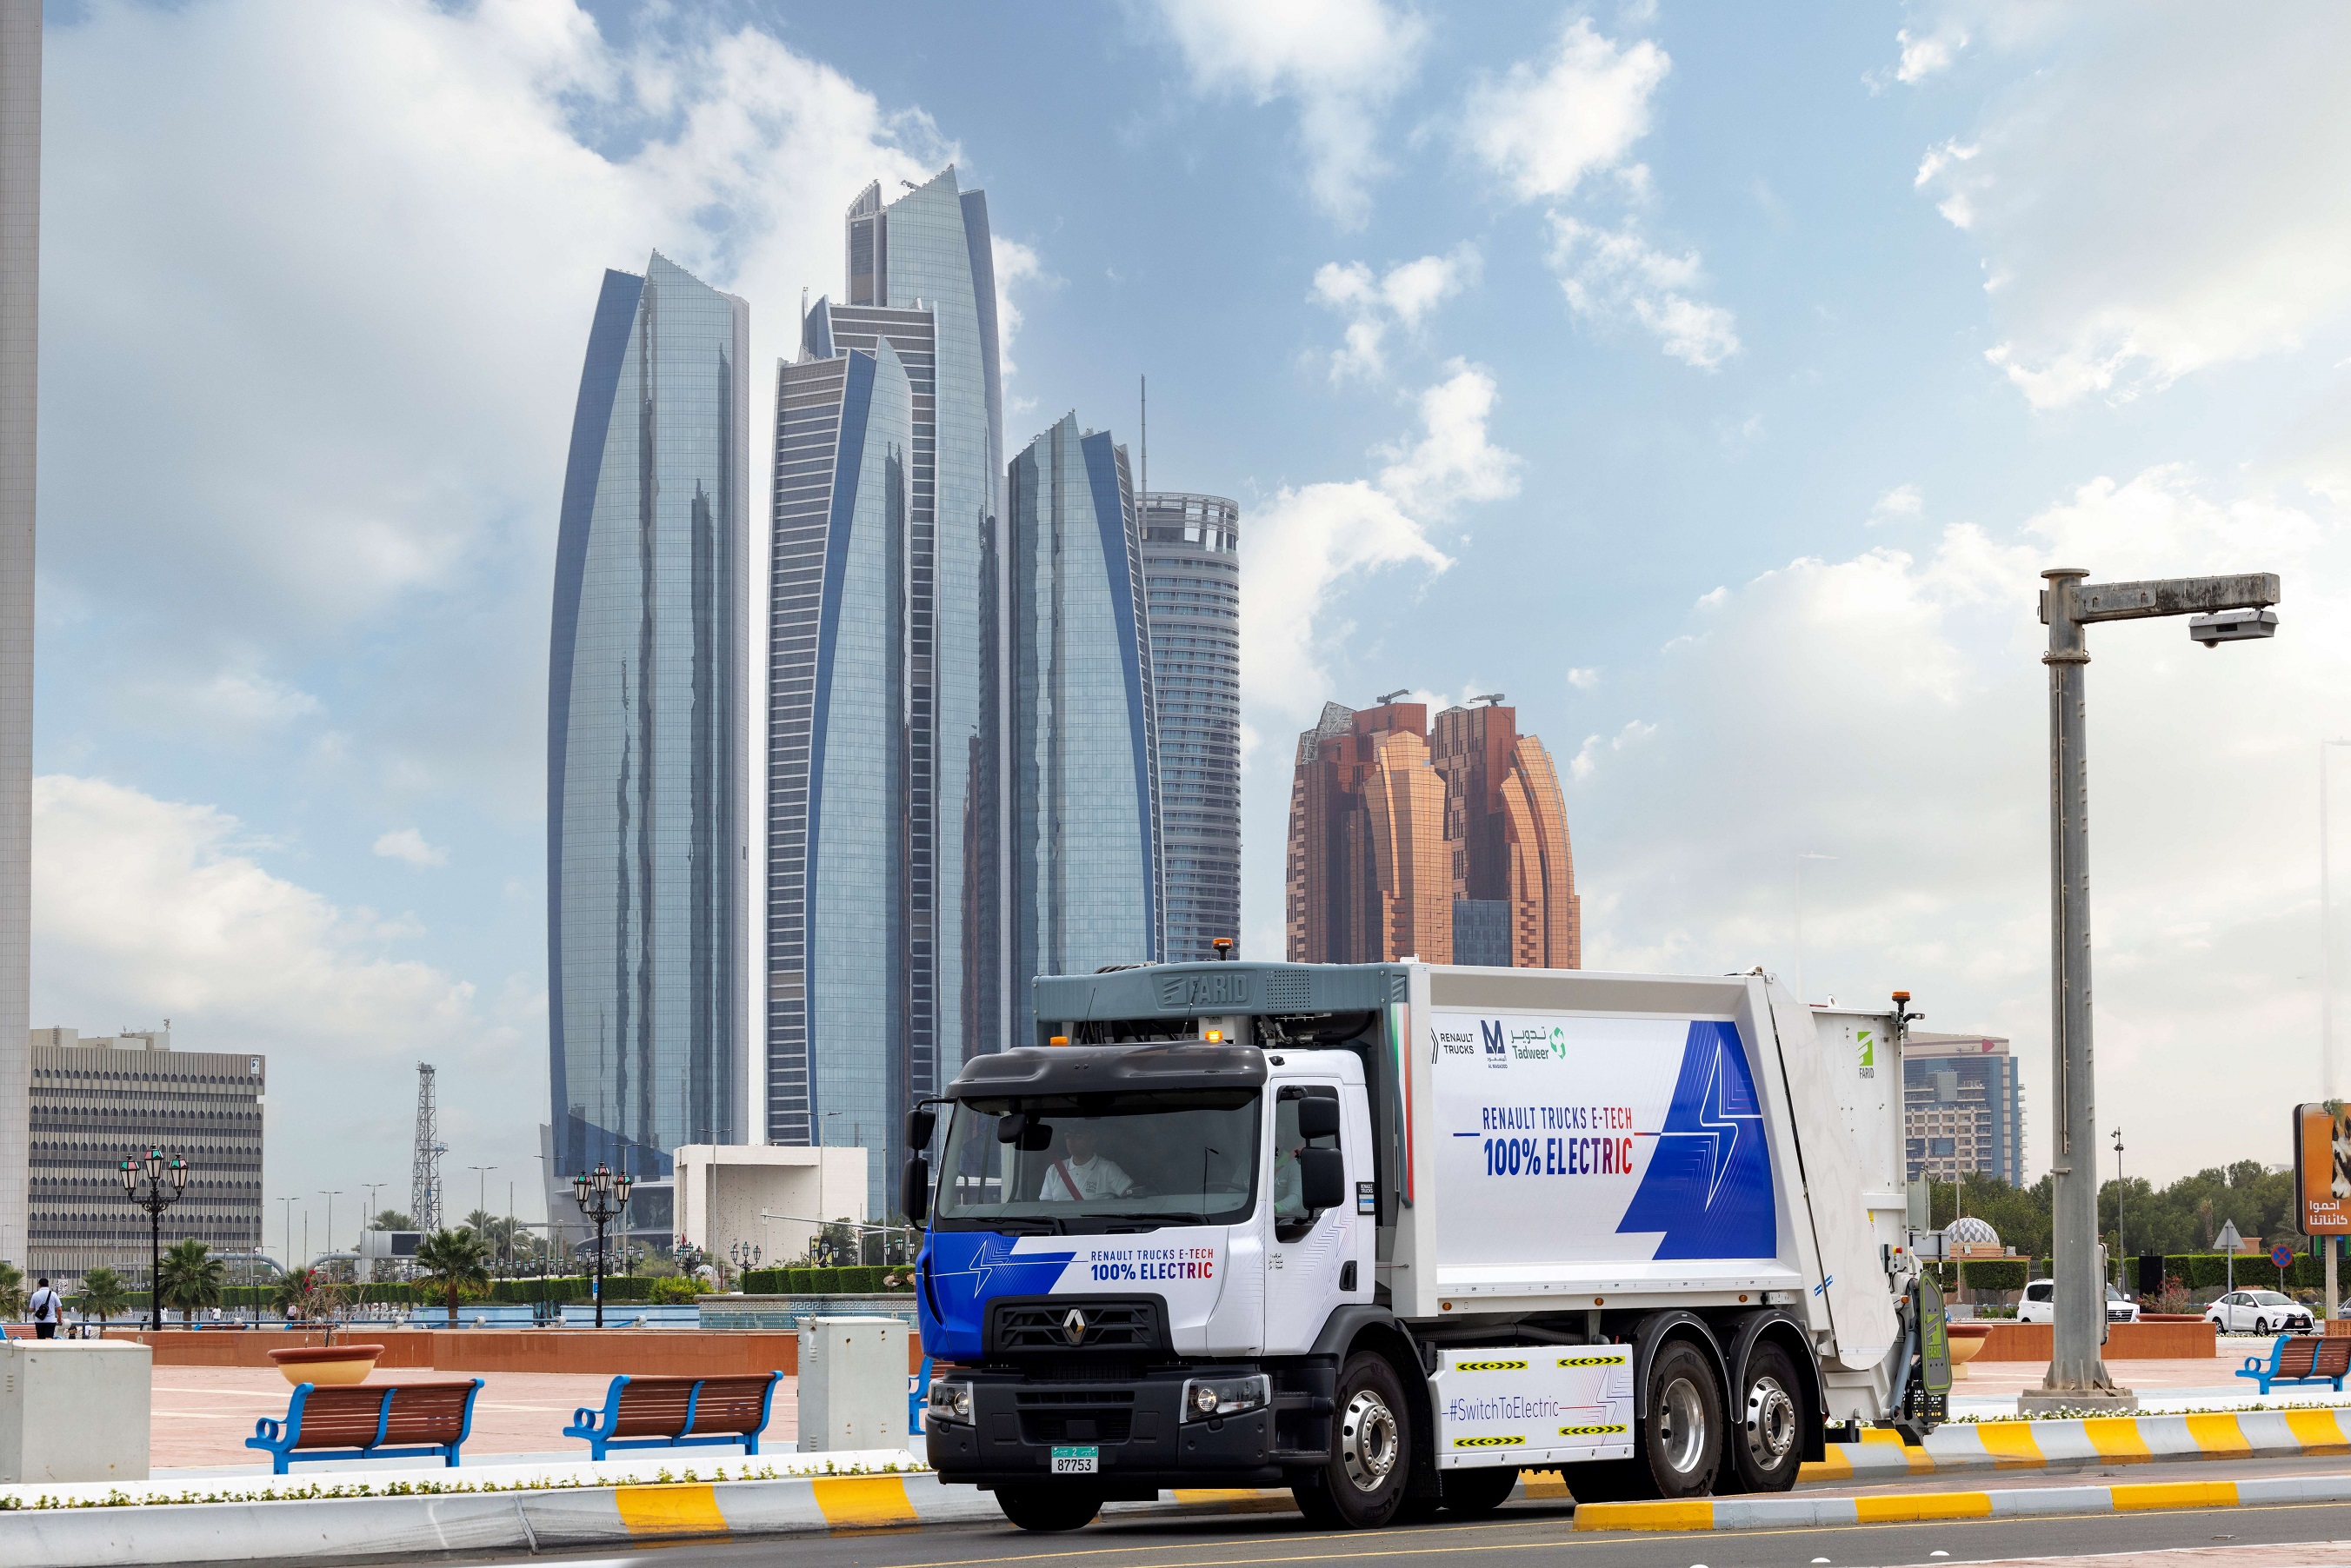 Renault Trucks, Al Masaood, and Tadweer launch the first 100% electric waste truck in the UAE